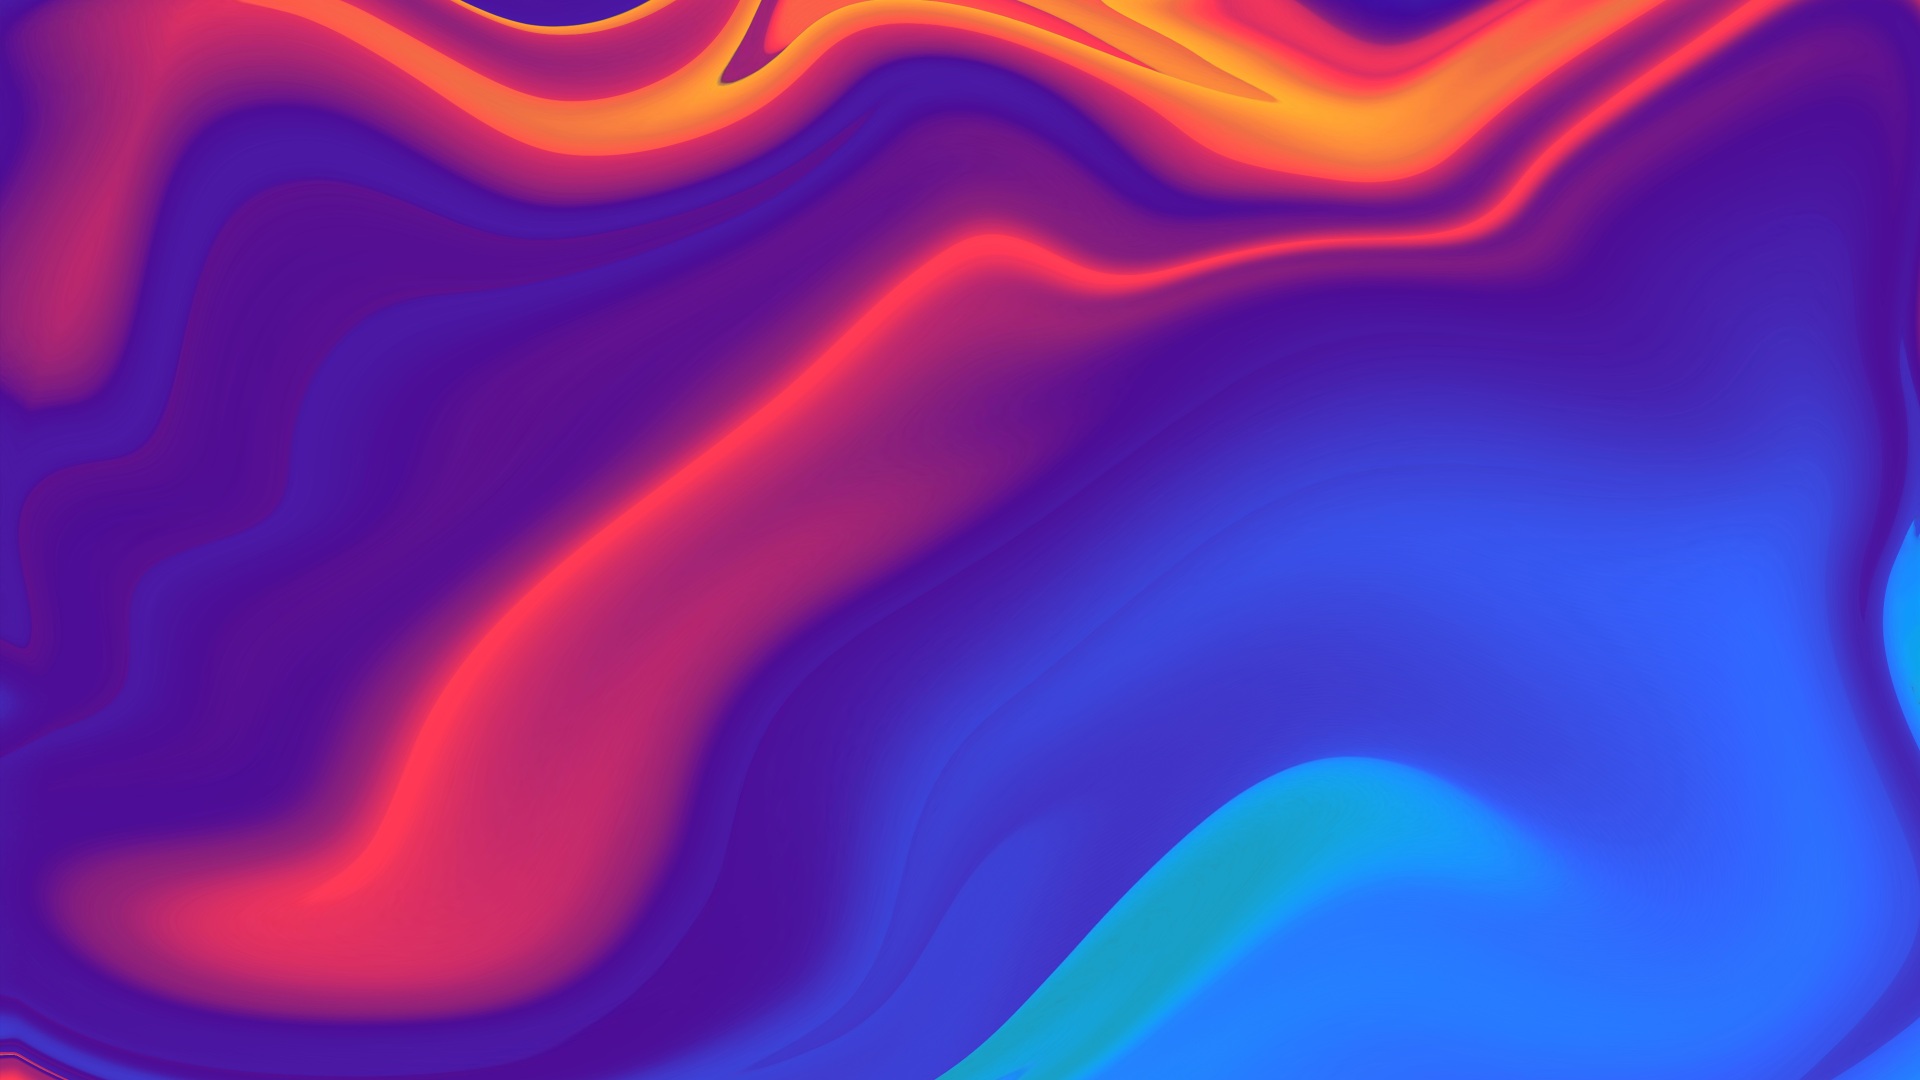 Wallpaper 4k Red Blue Lines Abstract Wallpaper